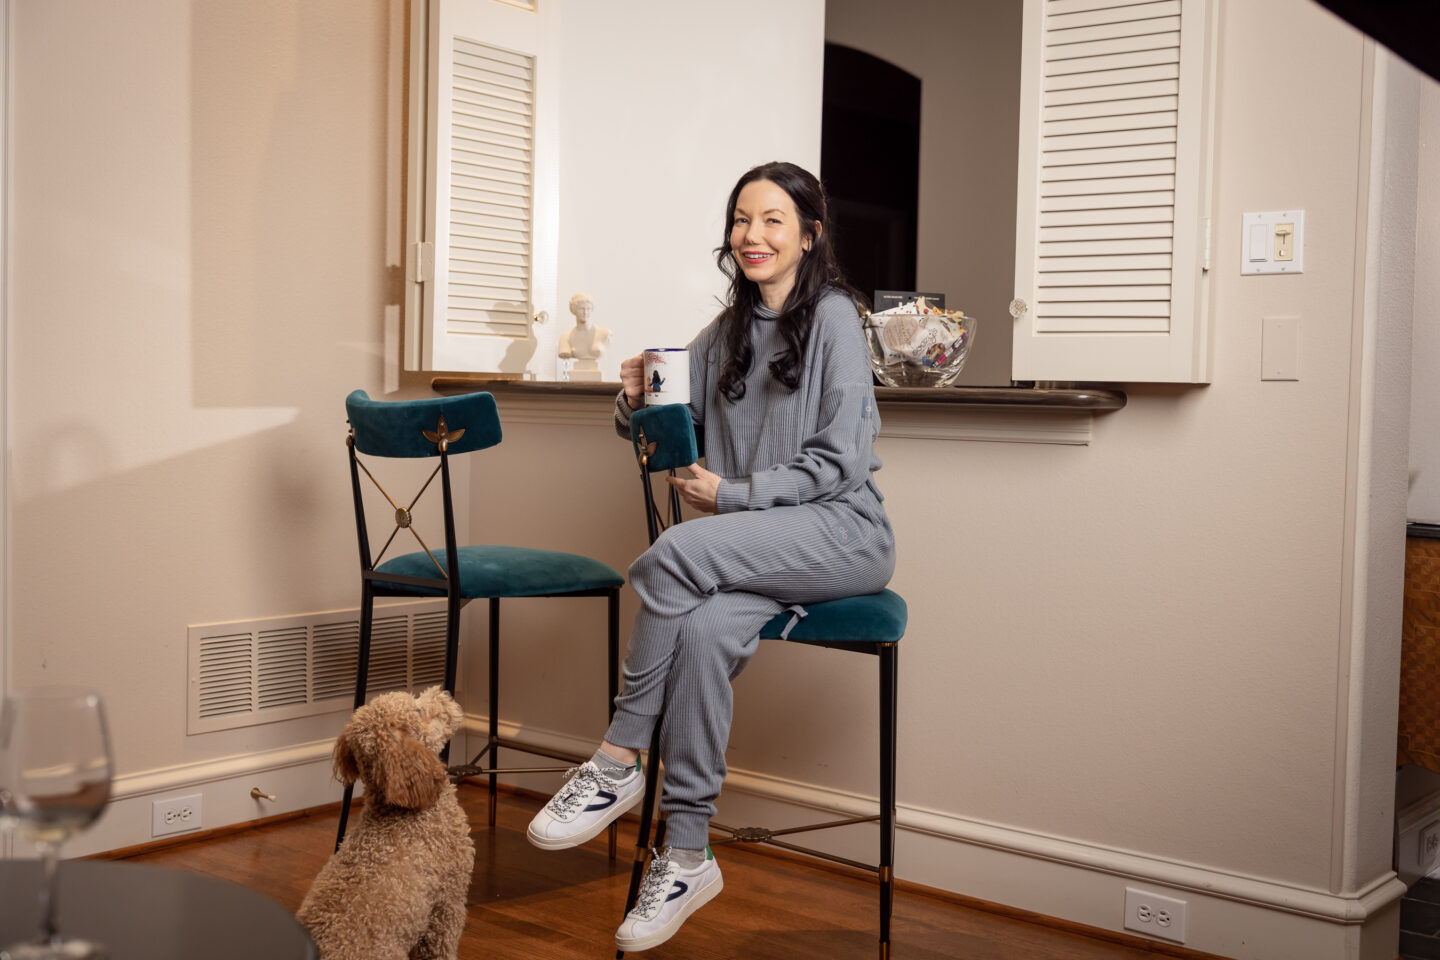 Dallas Home Interior, Alo Yoga Muse Hoodie and Sweatpant Set, Adaptogens, Healthy Snacks, Home Update, Mini Goldendoodle Puppy, Jonathan Adler Rider Counter Stools, Home Bar, Yappy.com custom mug 